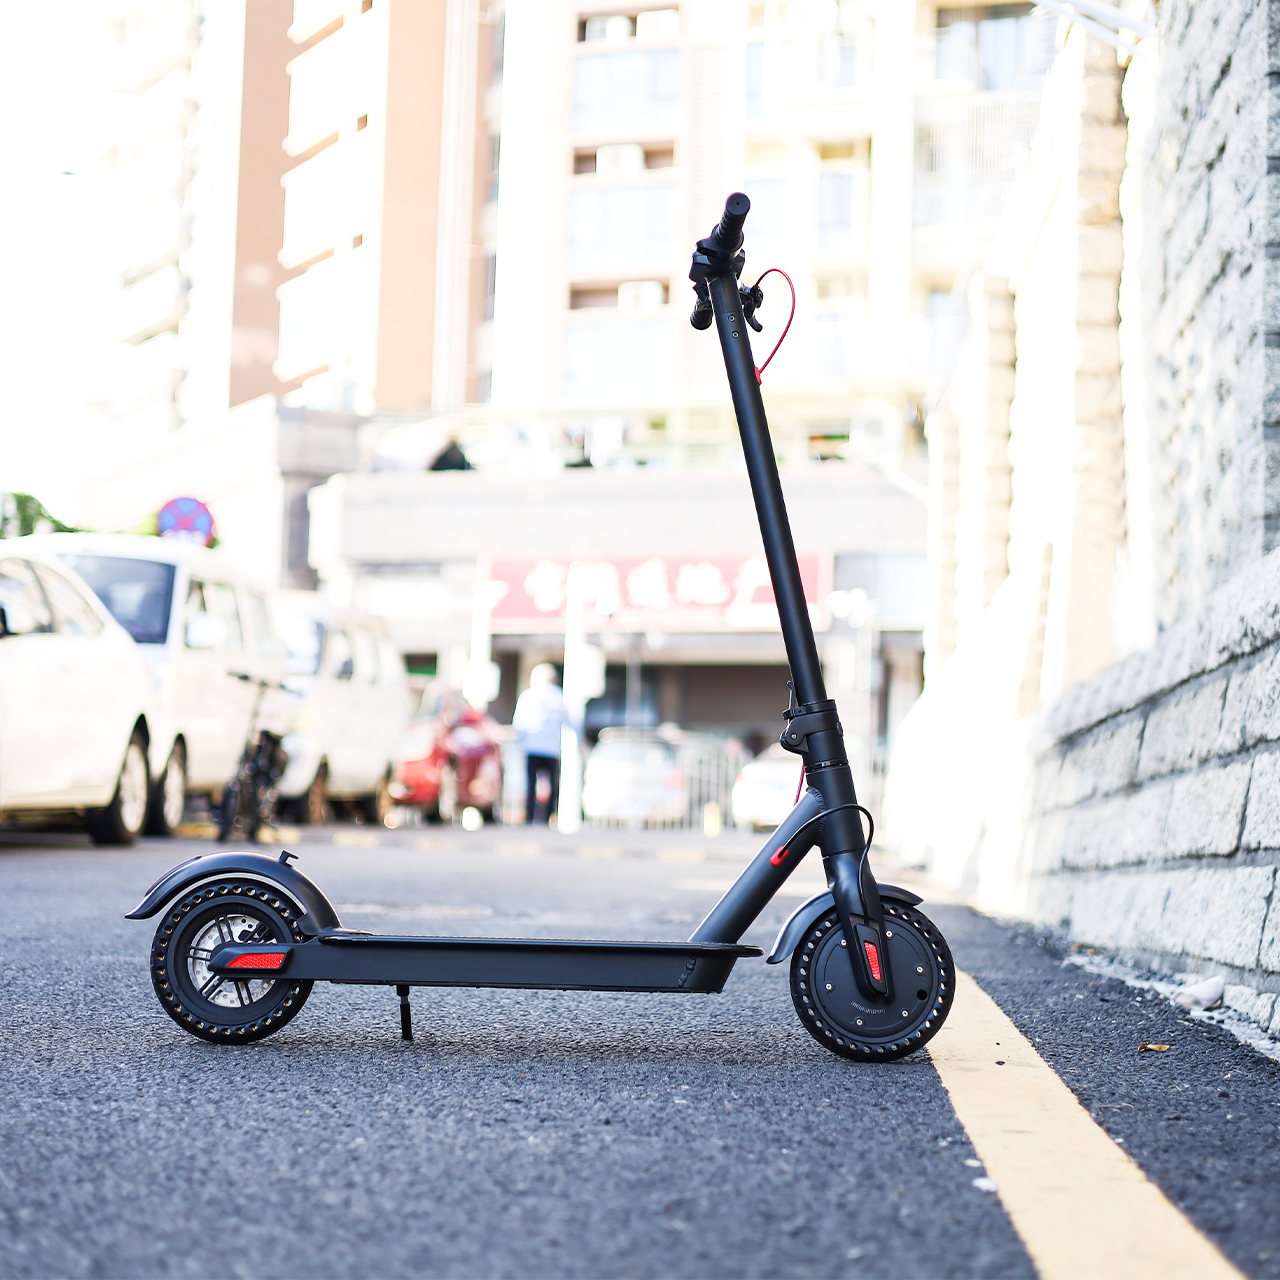 How to Choose Electric Scooter Tires?